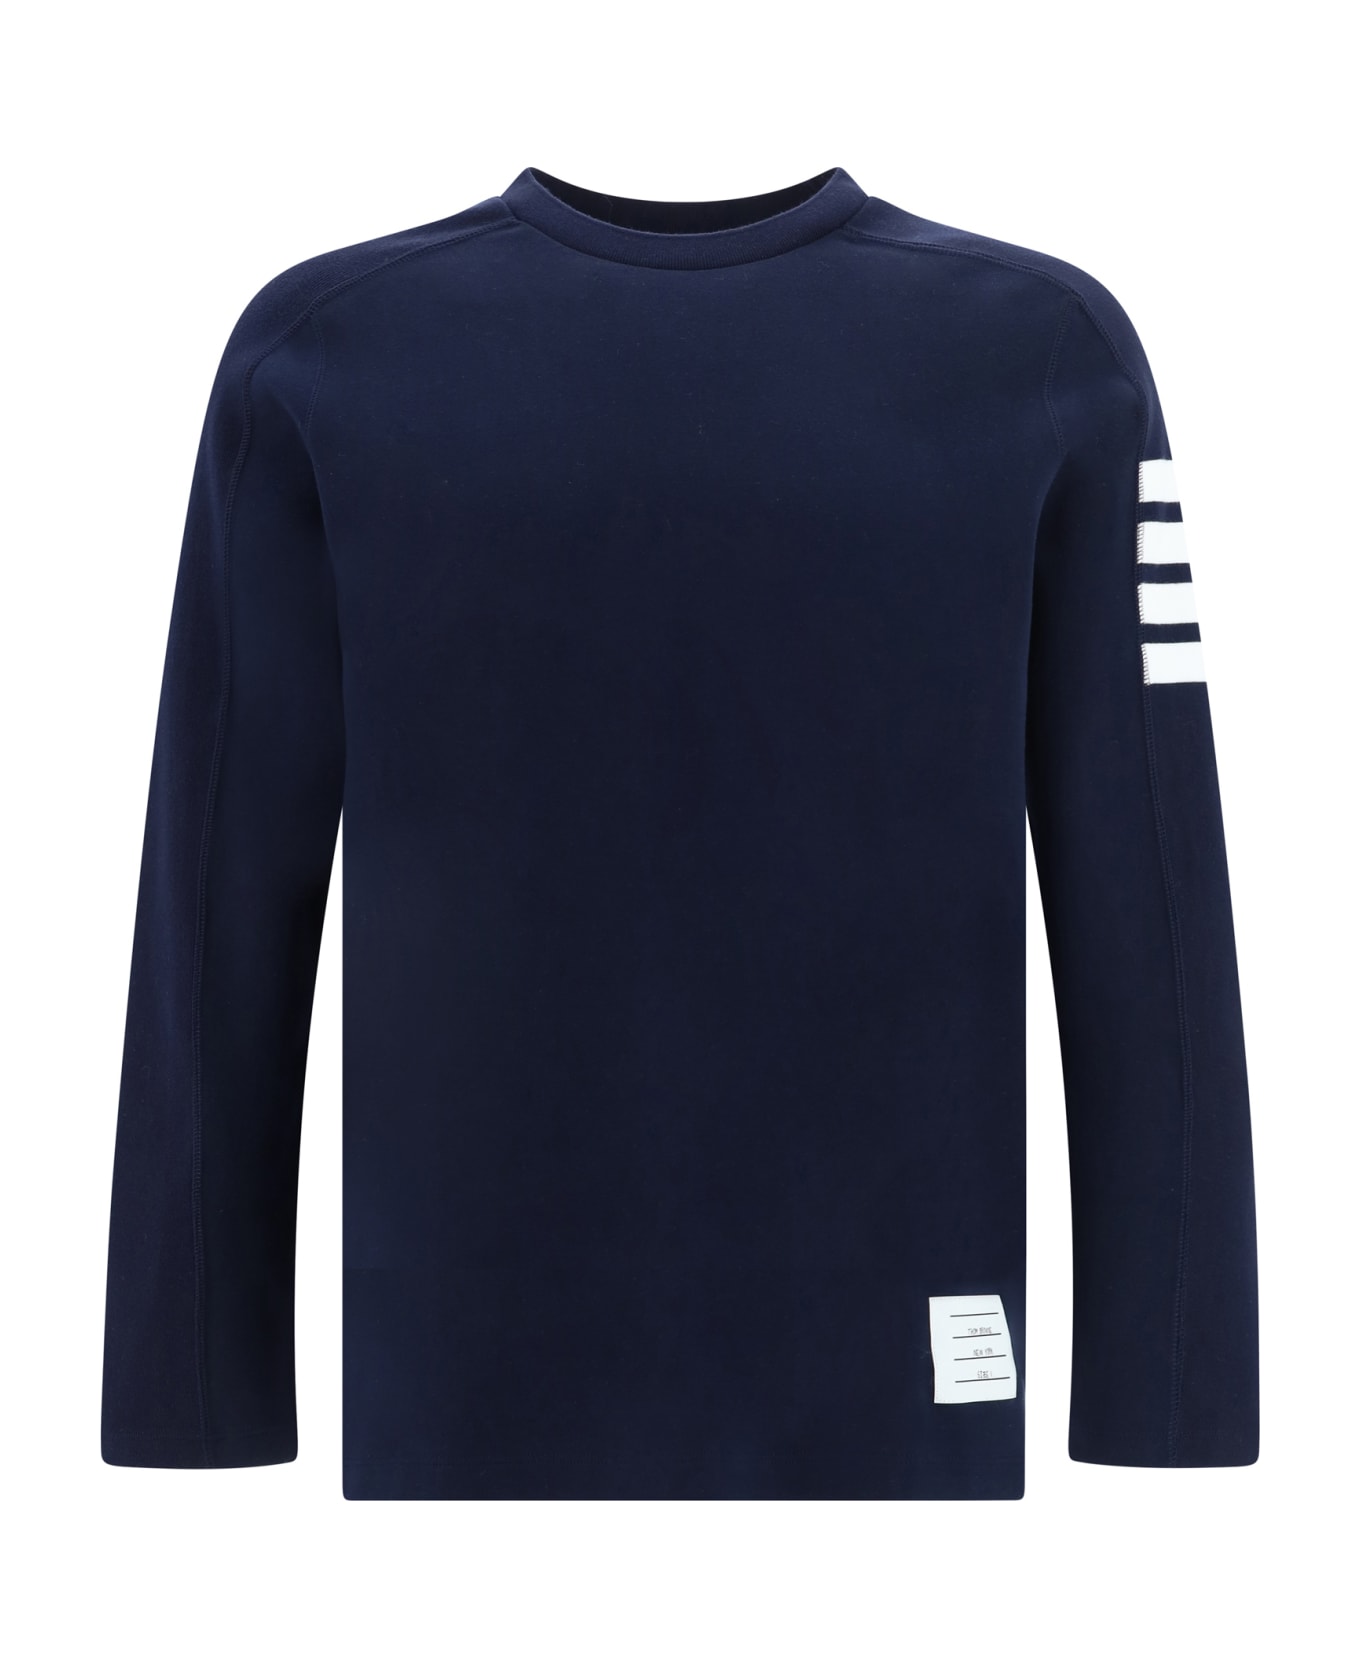 Thom Browne Long Sleeve Jersey - Navy